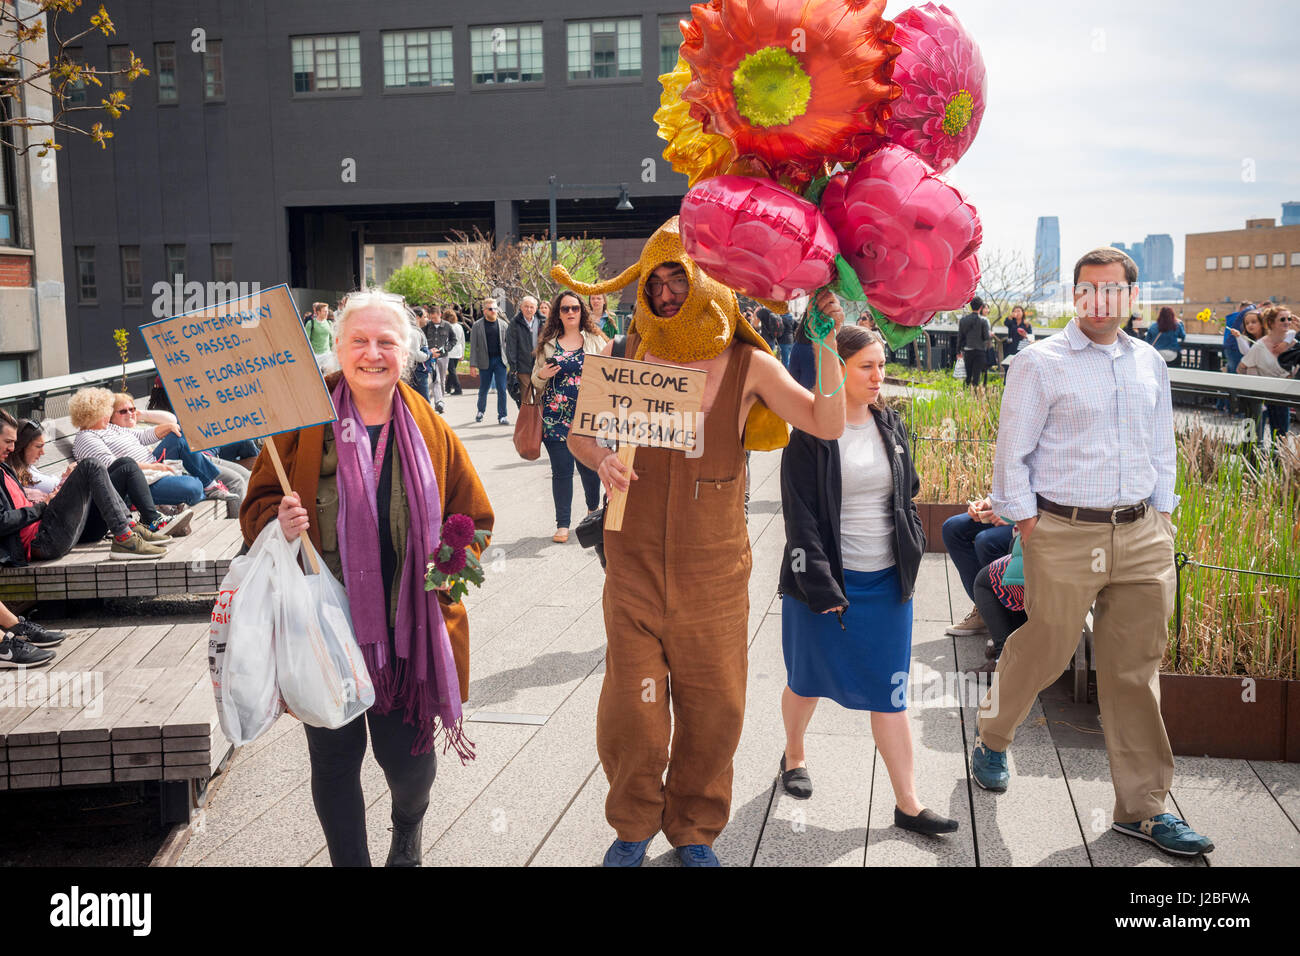 The Brazilian artist, André Feliciano, right, known as the 'art gardener' walks down the High Line Park in New York assisted by artist Nancy Prusinowski, left, on Sunday, April 23, 2017 distributing balloons and flowers to passer-by in his performance art piece, the Floraissance parade. The Floraissance is an art movement created by Feliciano based on the idea that contemporary cannot describe art anymore and we art moving into the next phase, growing like flowers, into the Floraissance. (© Richard B. Levine) Stock Photo